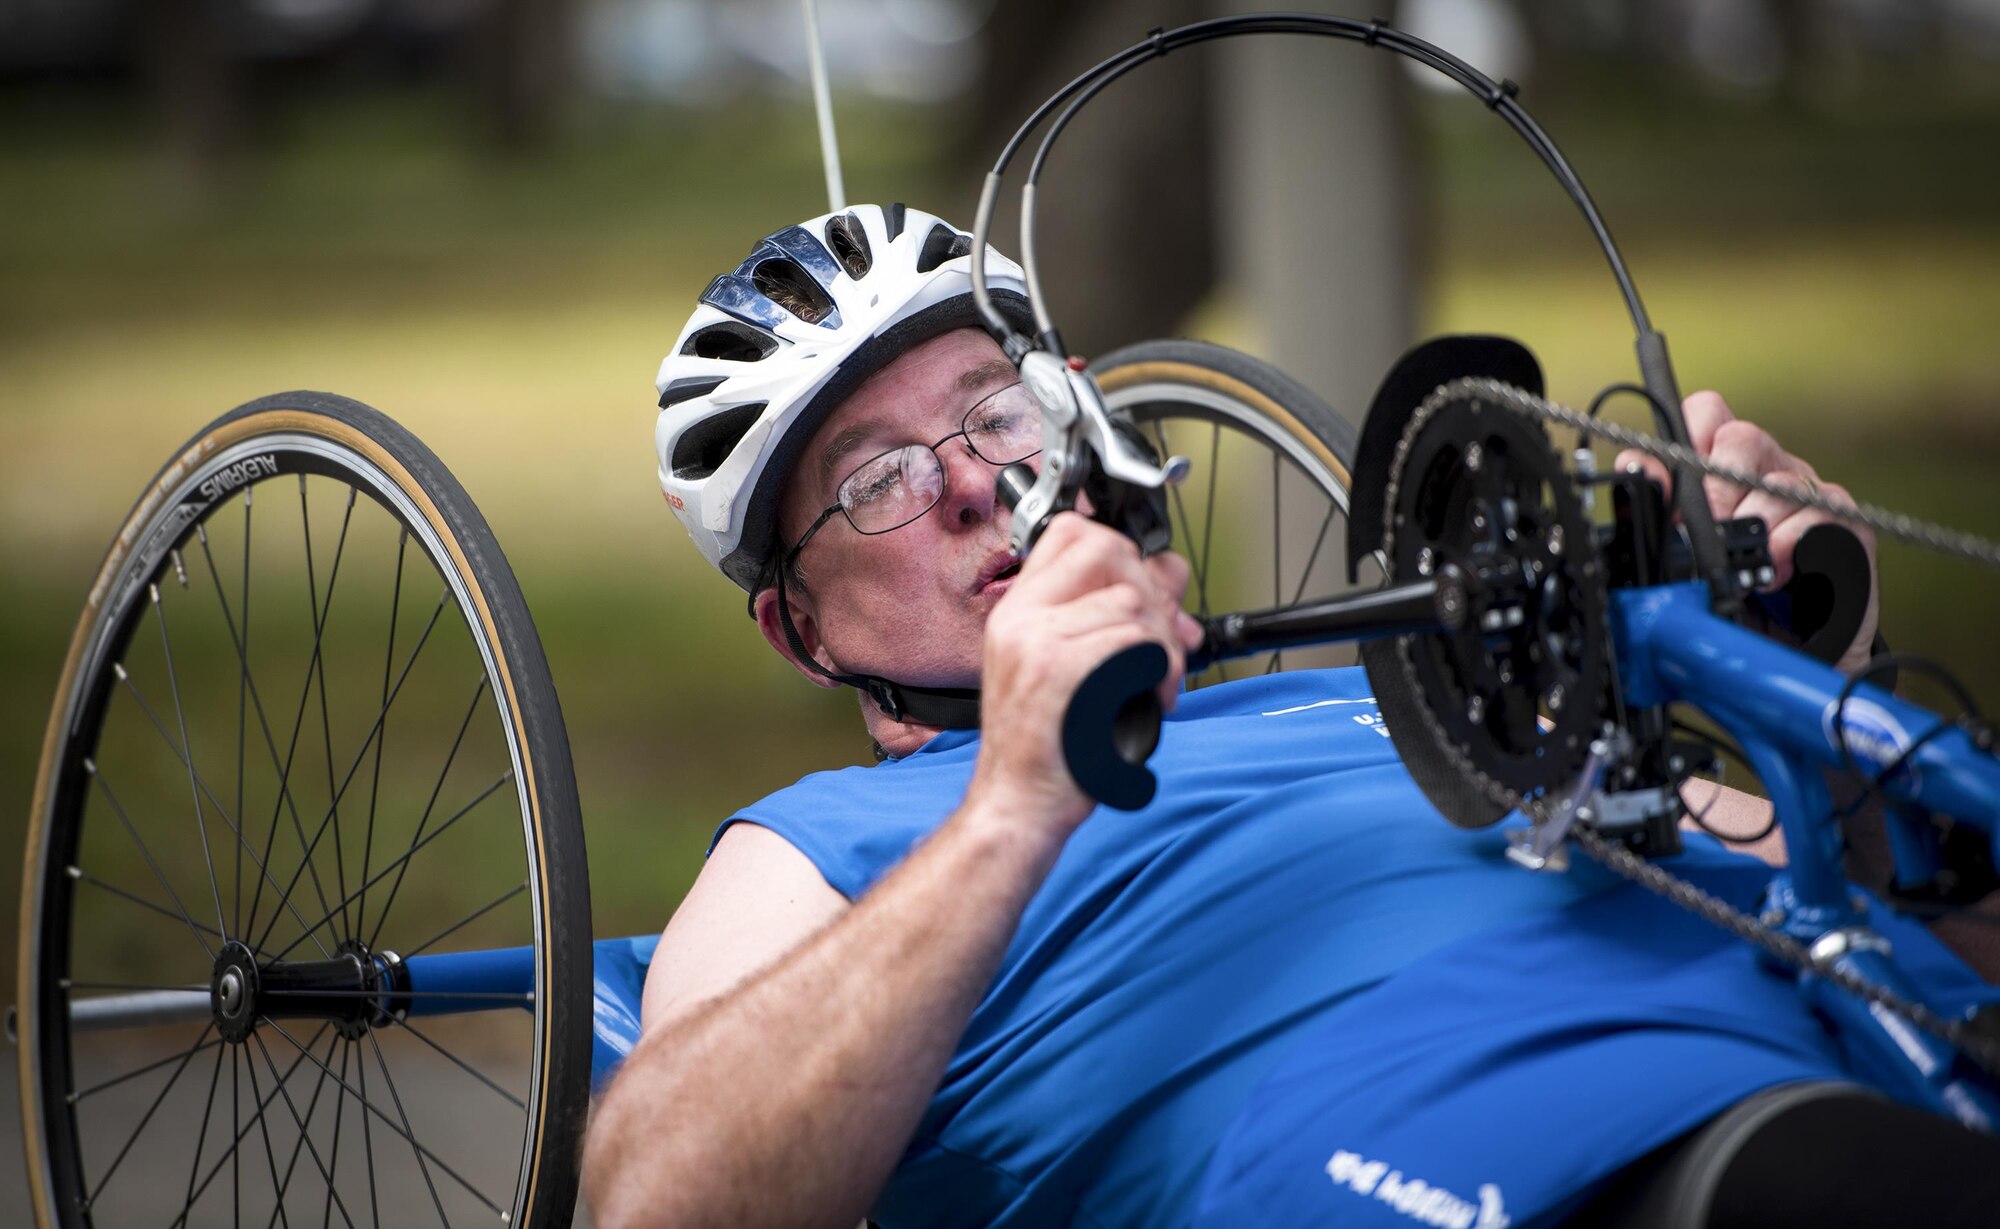 Chris Rust, a Warrior Games athlete, prepares to take a turn on a recumbent bike during a cycling session at the Air Force team’s training camp at Eglin Air Force Base, Fla., April 26. The base-hosted, week-long Warrior Games training camp is the last team practice session before the yearly competition in June. (U.S. Air Force photo/Samuel King Jr.)